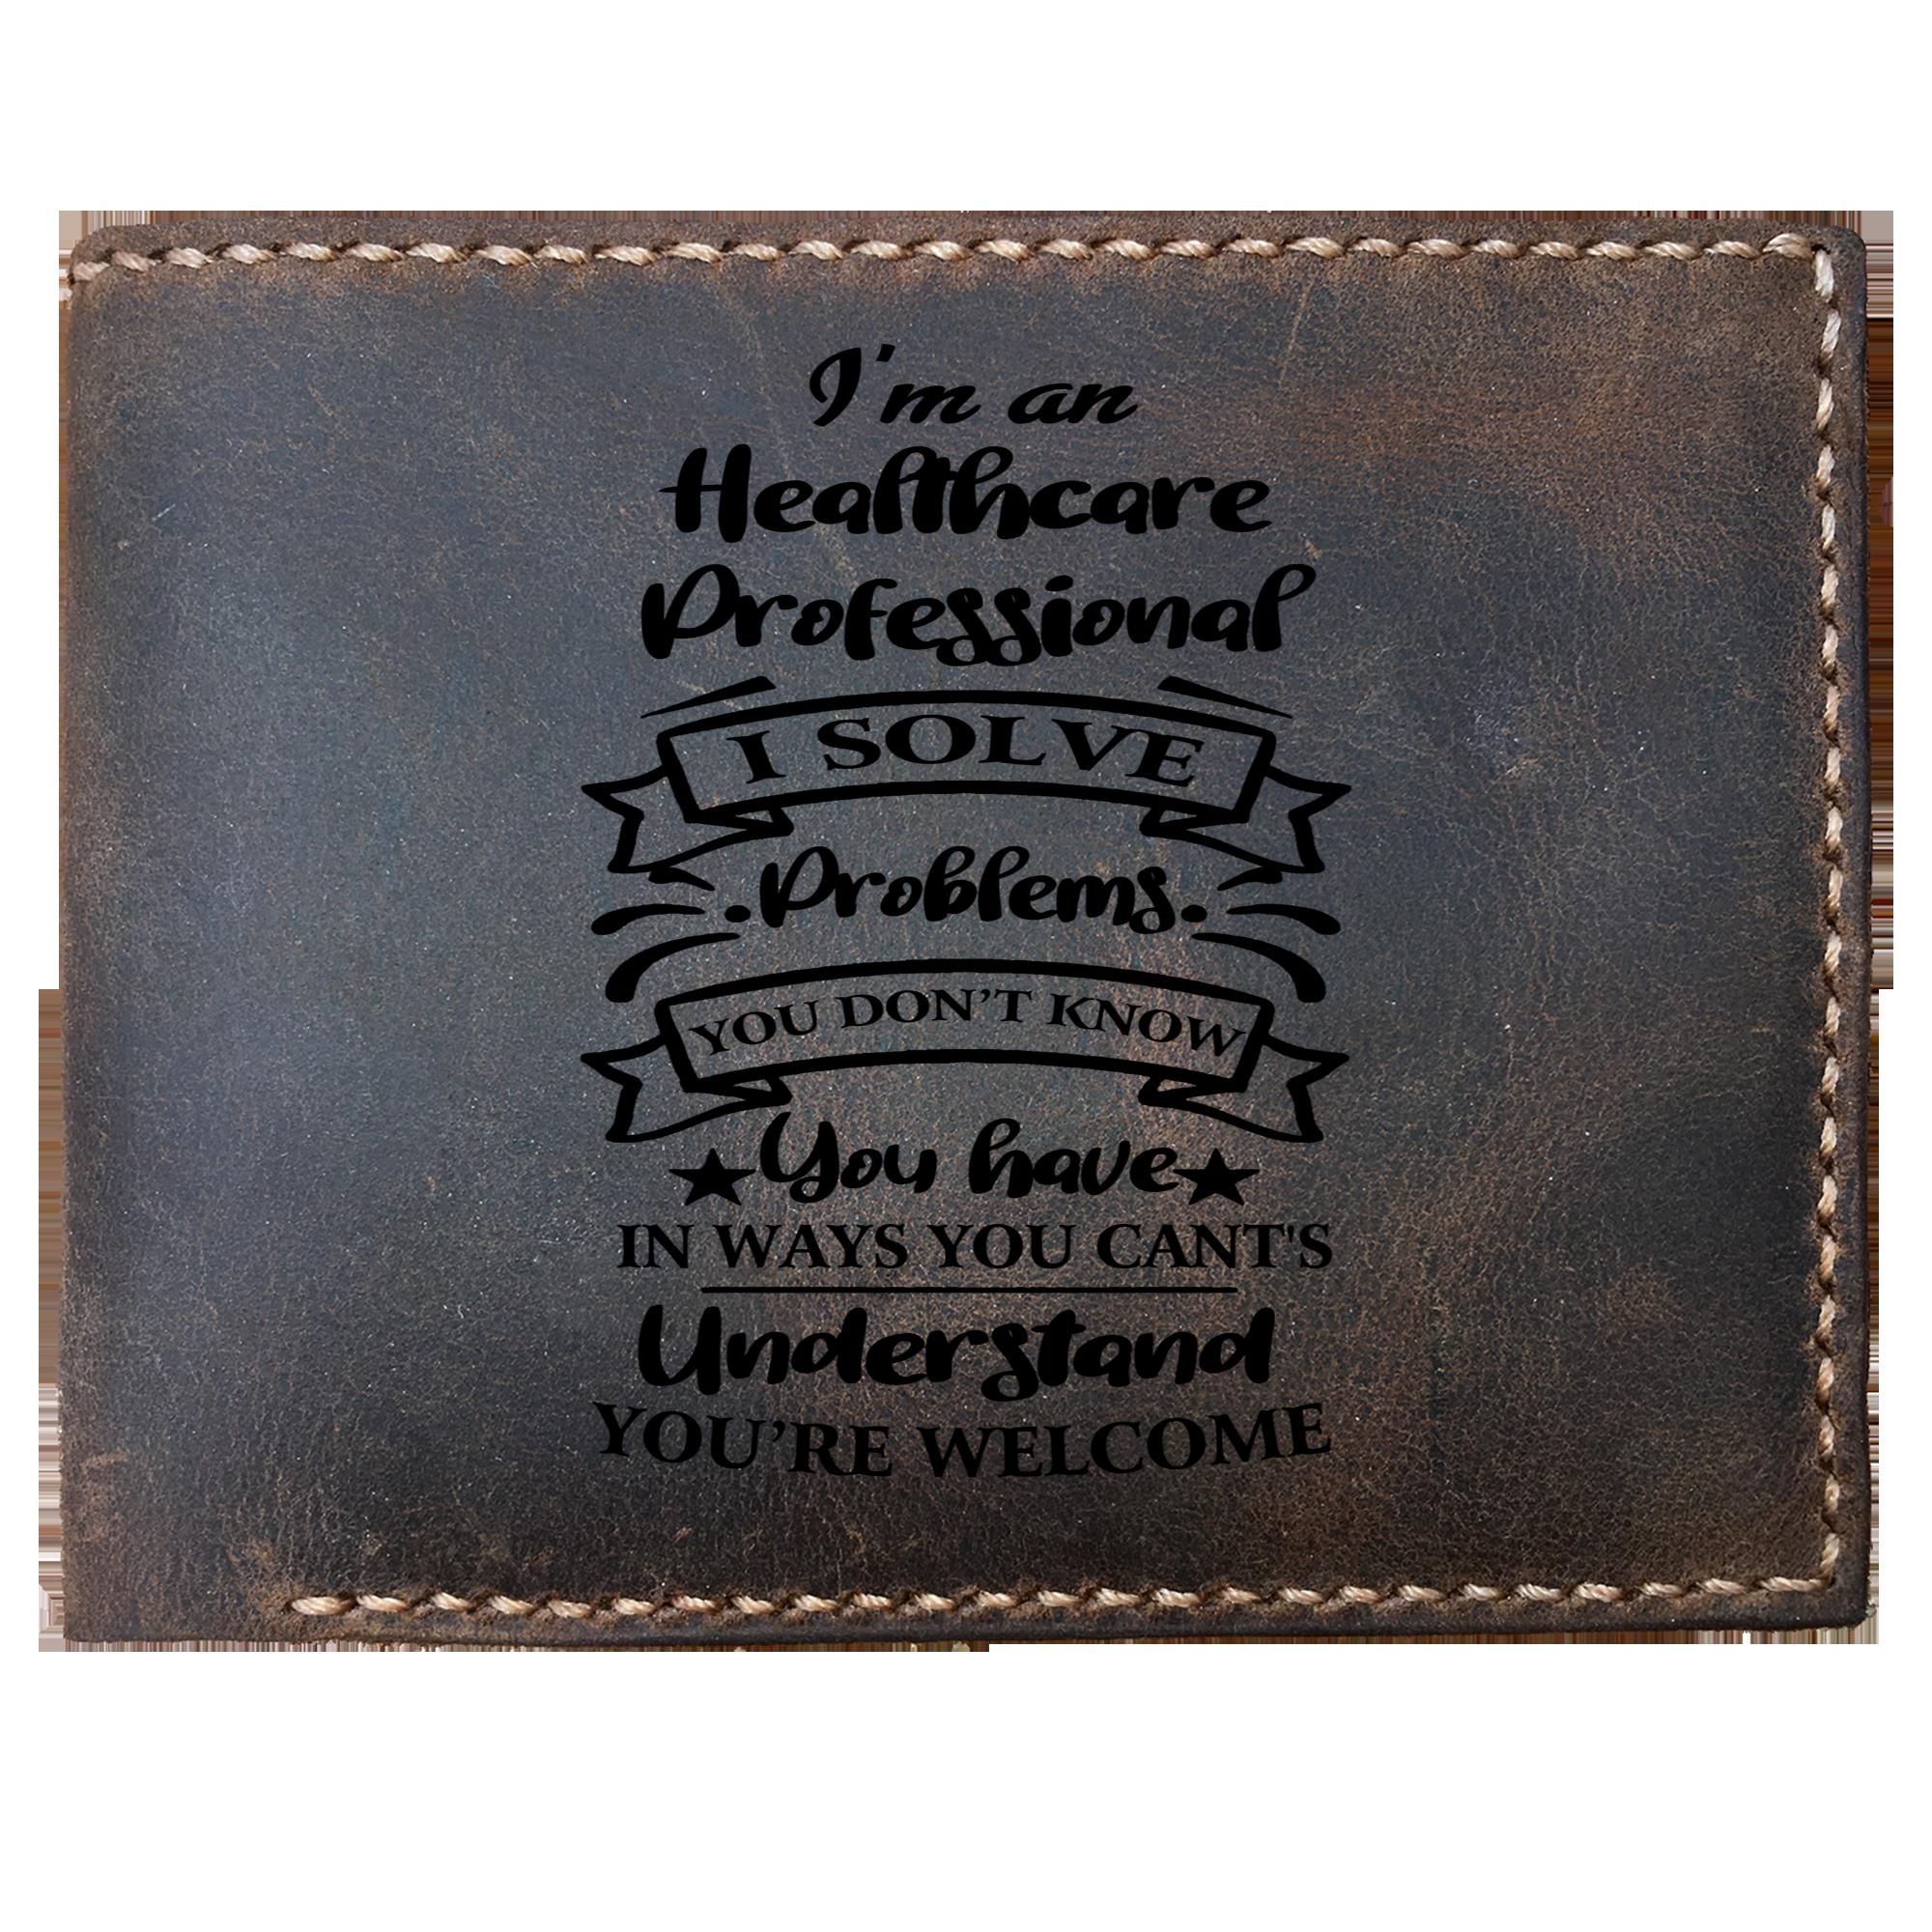 Skitongifts Funny Custom Laser Engraved Bifold Leather Wallet For Men, I'm an Healthcare Professional Solve Problems, Father's Day Gifts